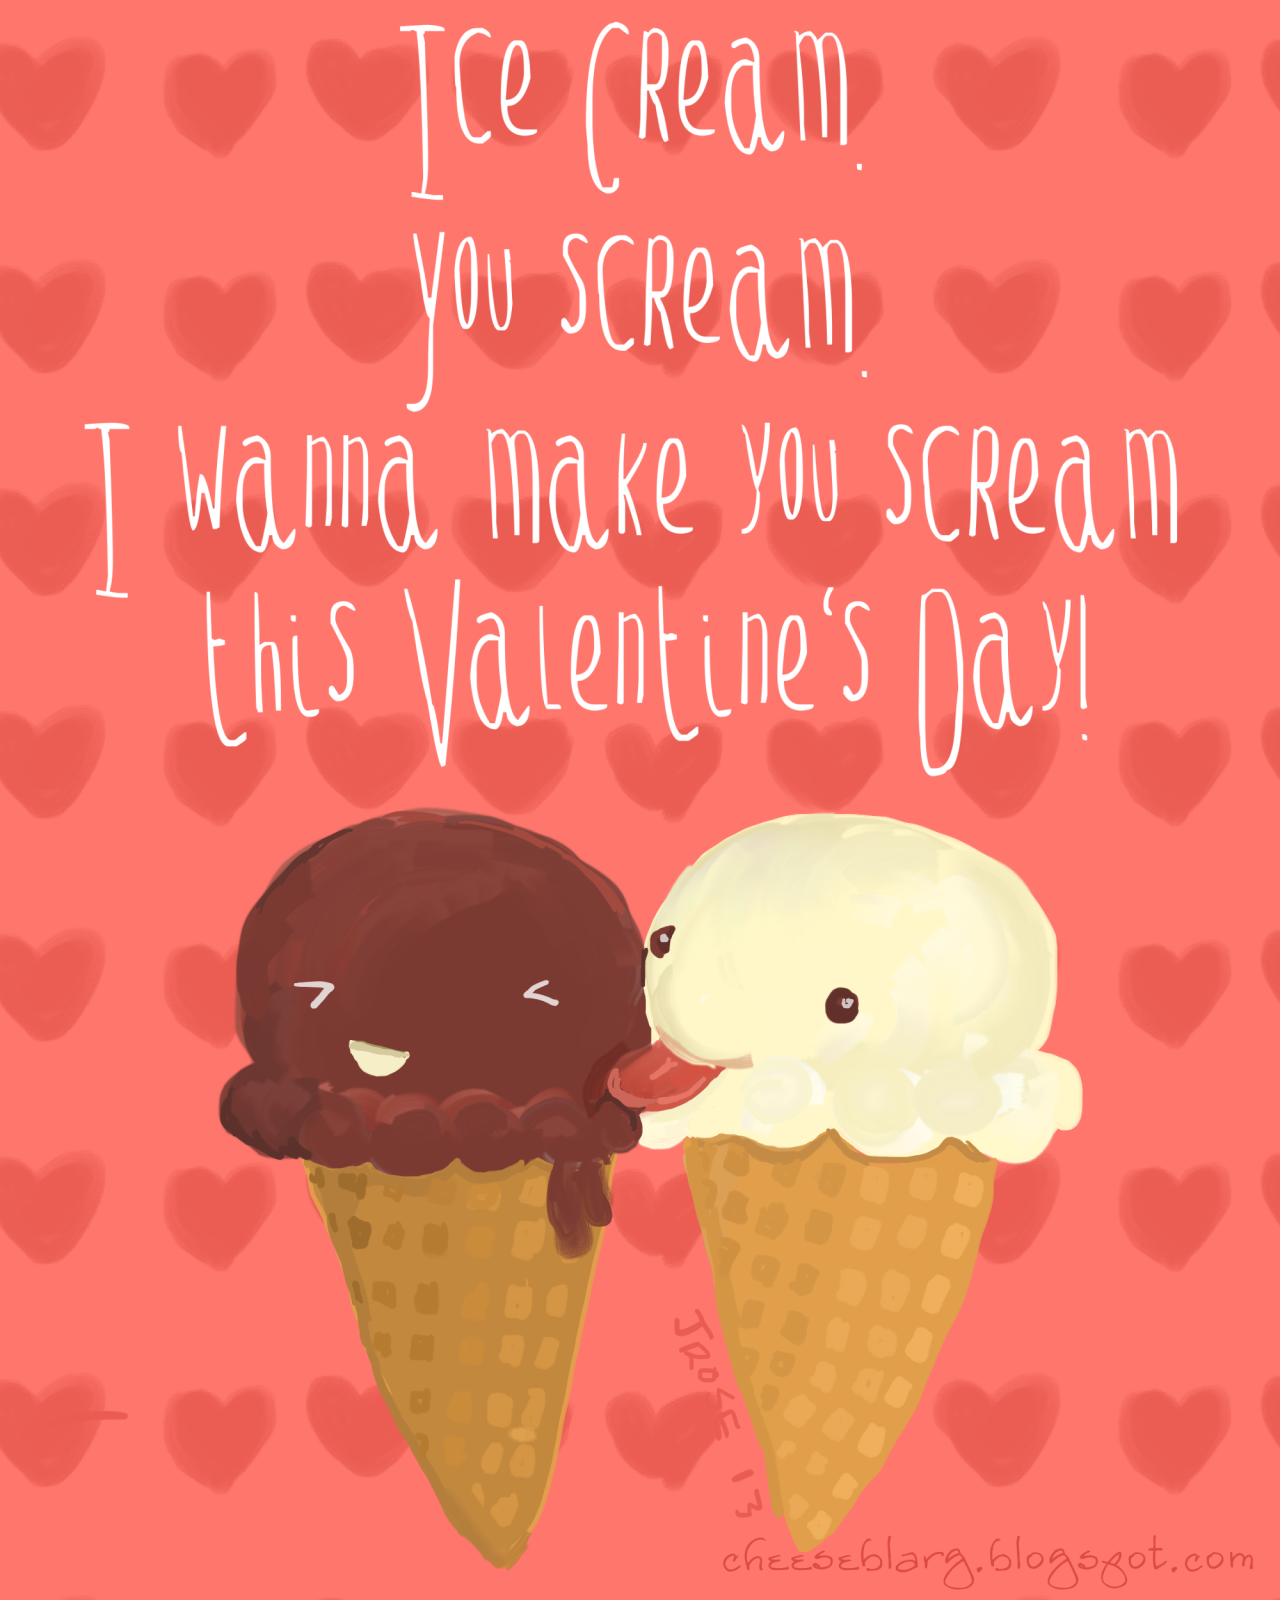 • cute food card Valentine inappropriate valentine's cards smutty cheeseblarg1280 x 1600